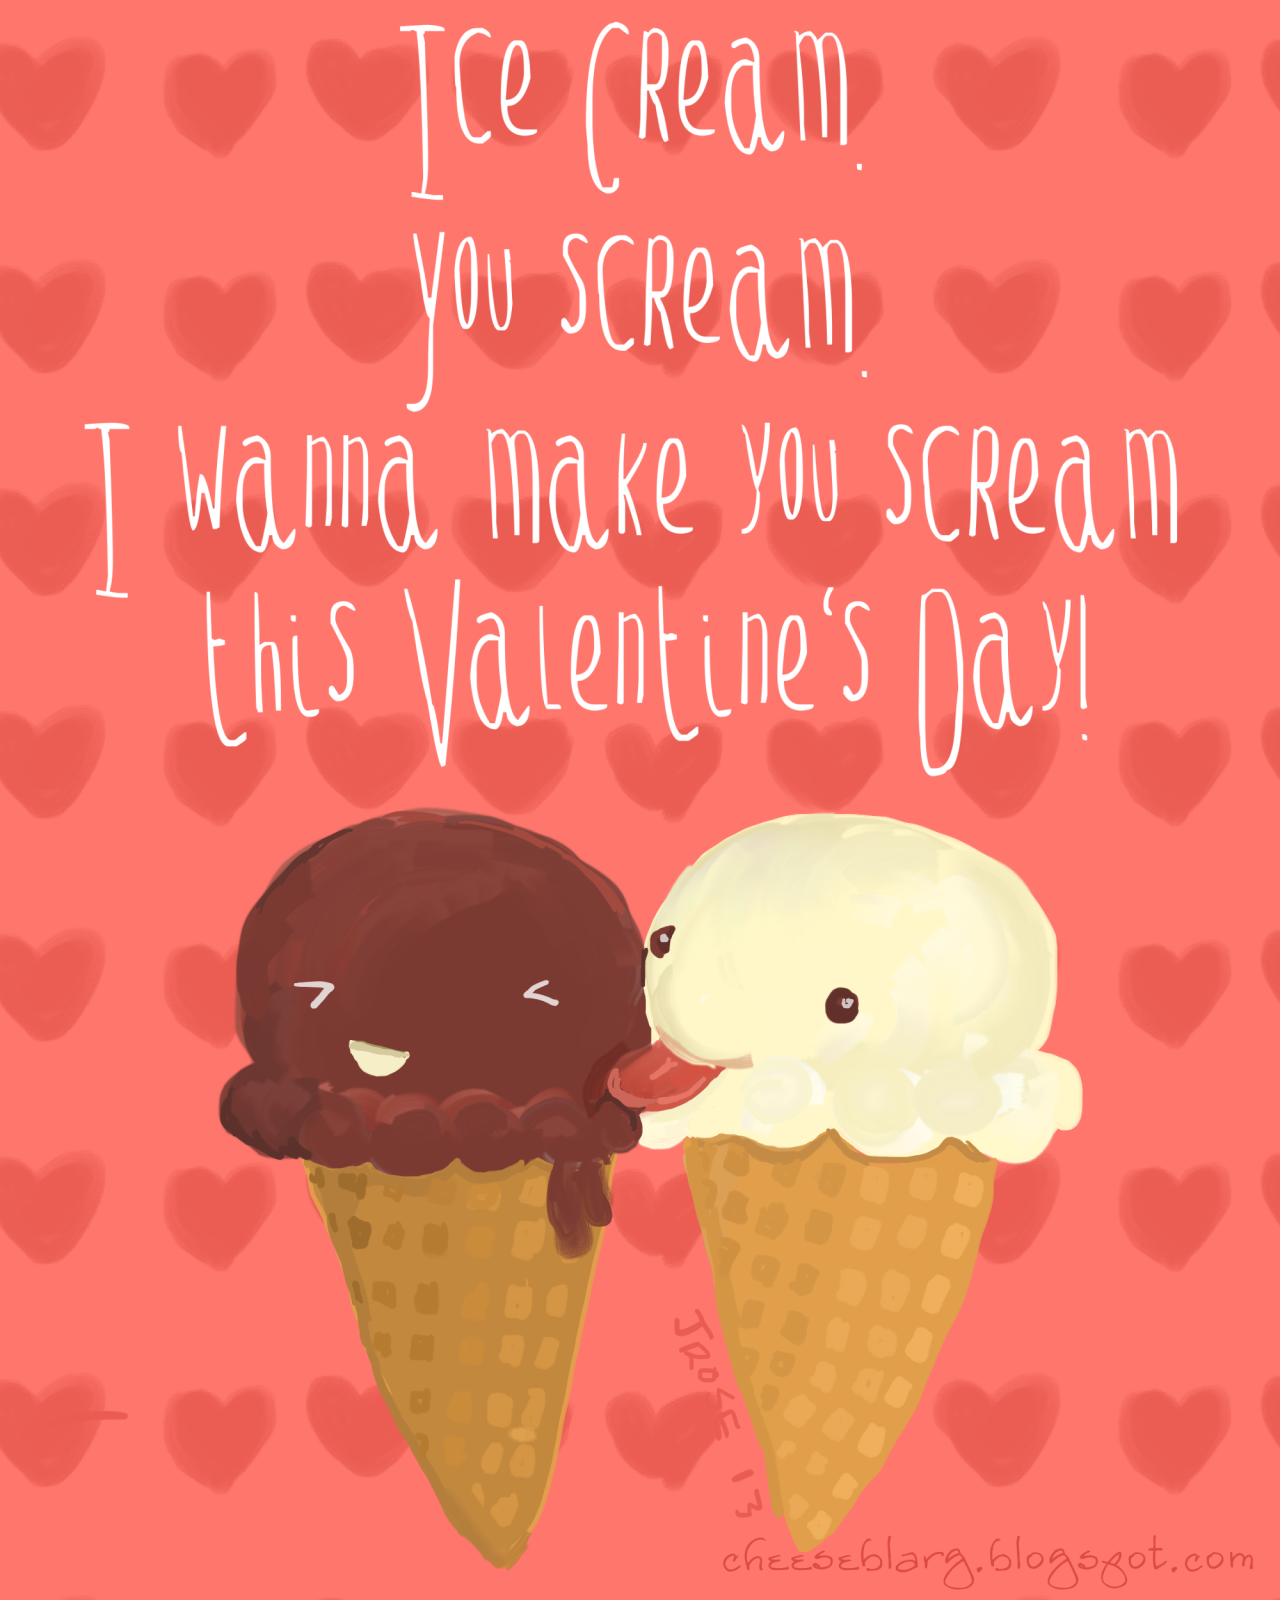 • cute food card Valentine inappropriate valentine's cards smutty cheeseblarg1280 x 1600